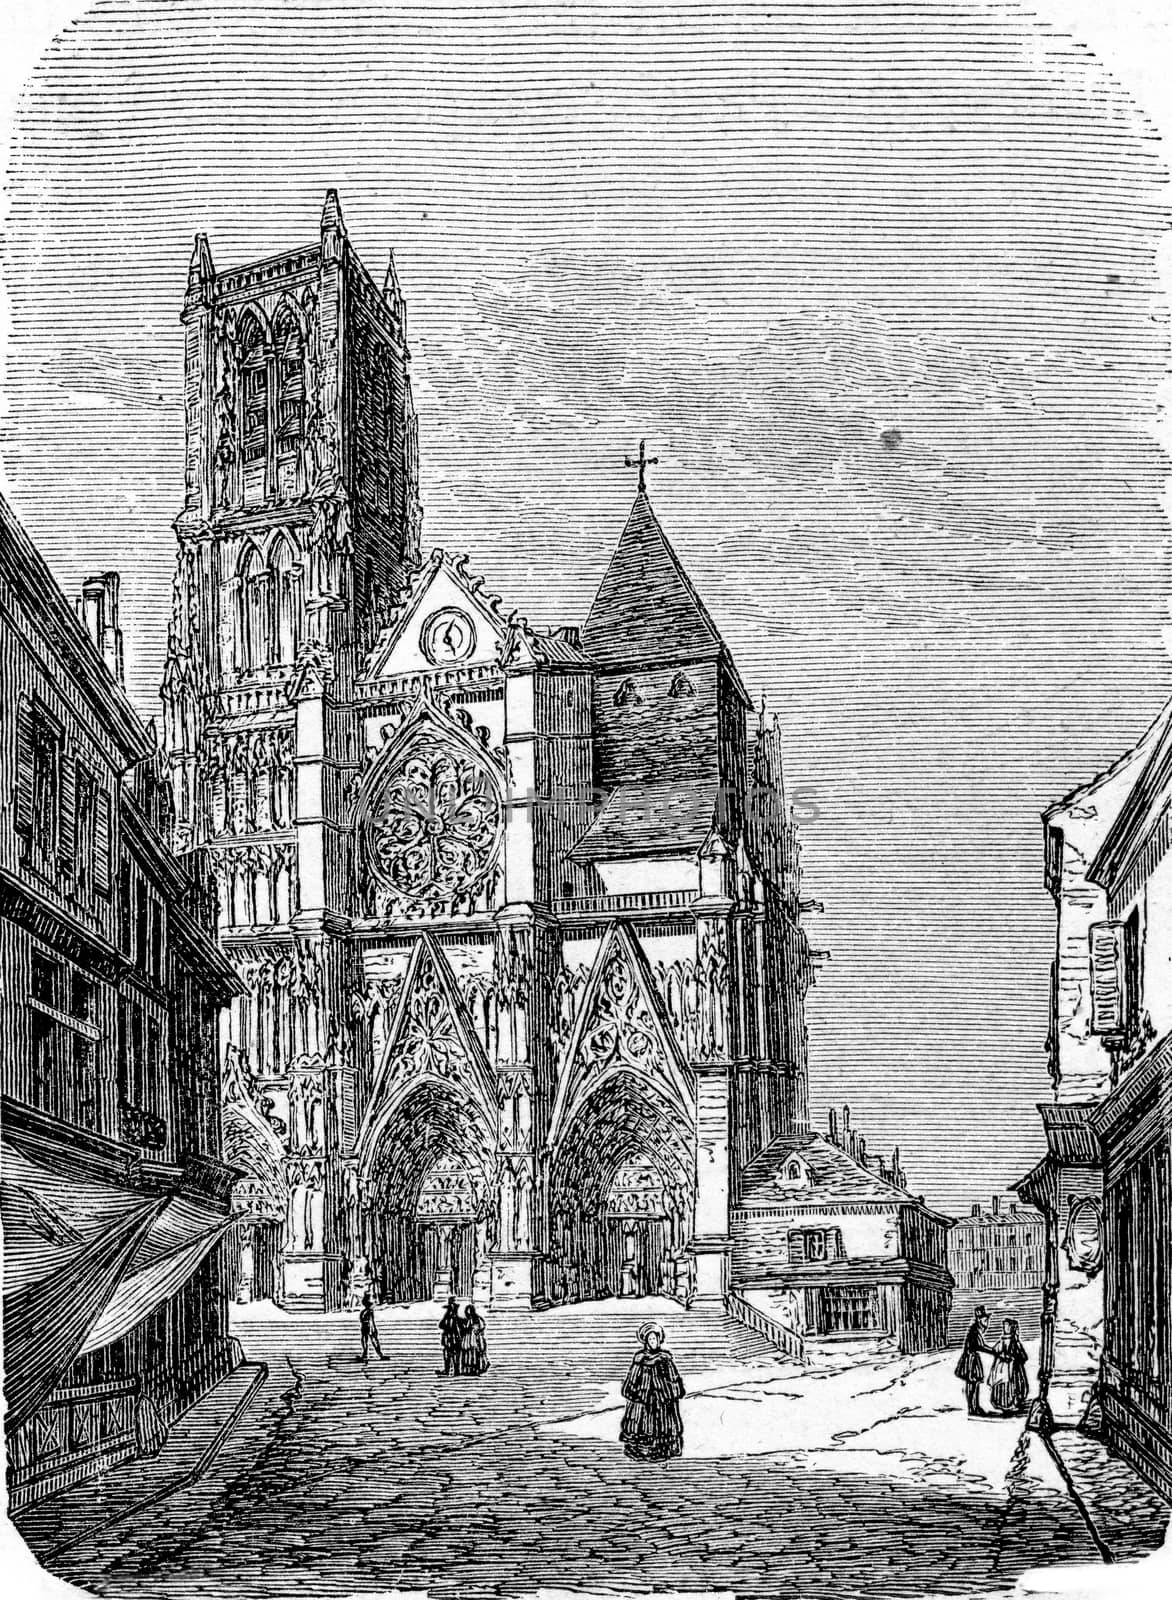 Meaux Cathedral in  Meaux, Seine-et-Marne, France. From Chemin des Ecoliers, vintage engraving, 1876.
